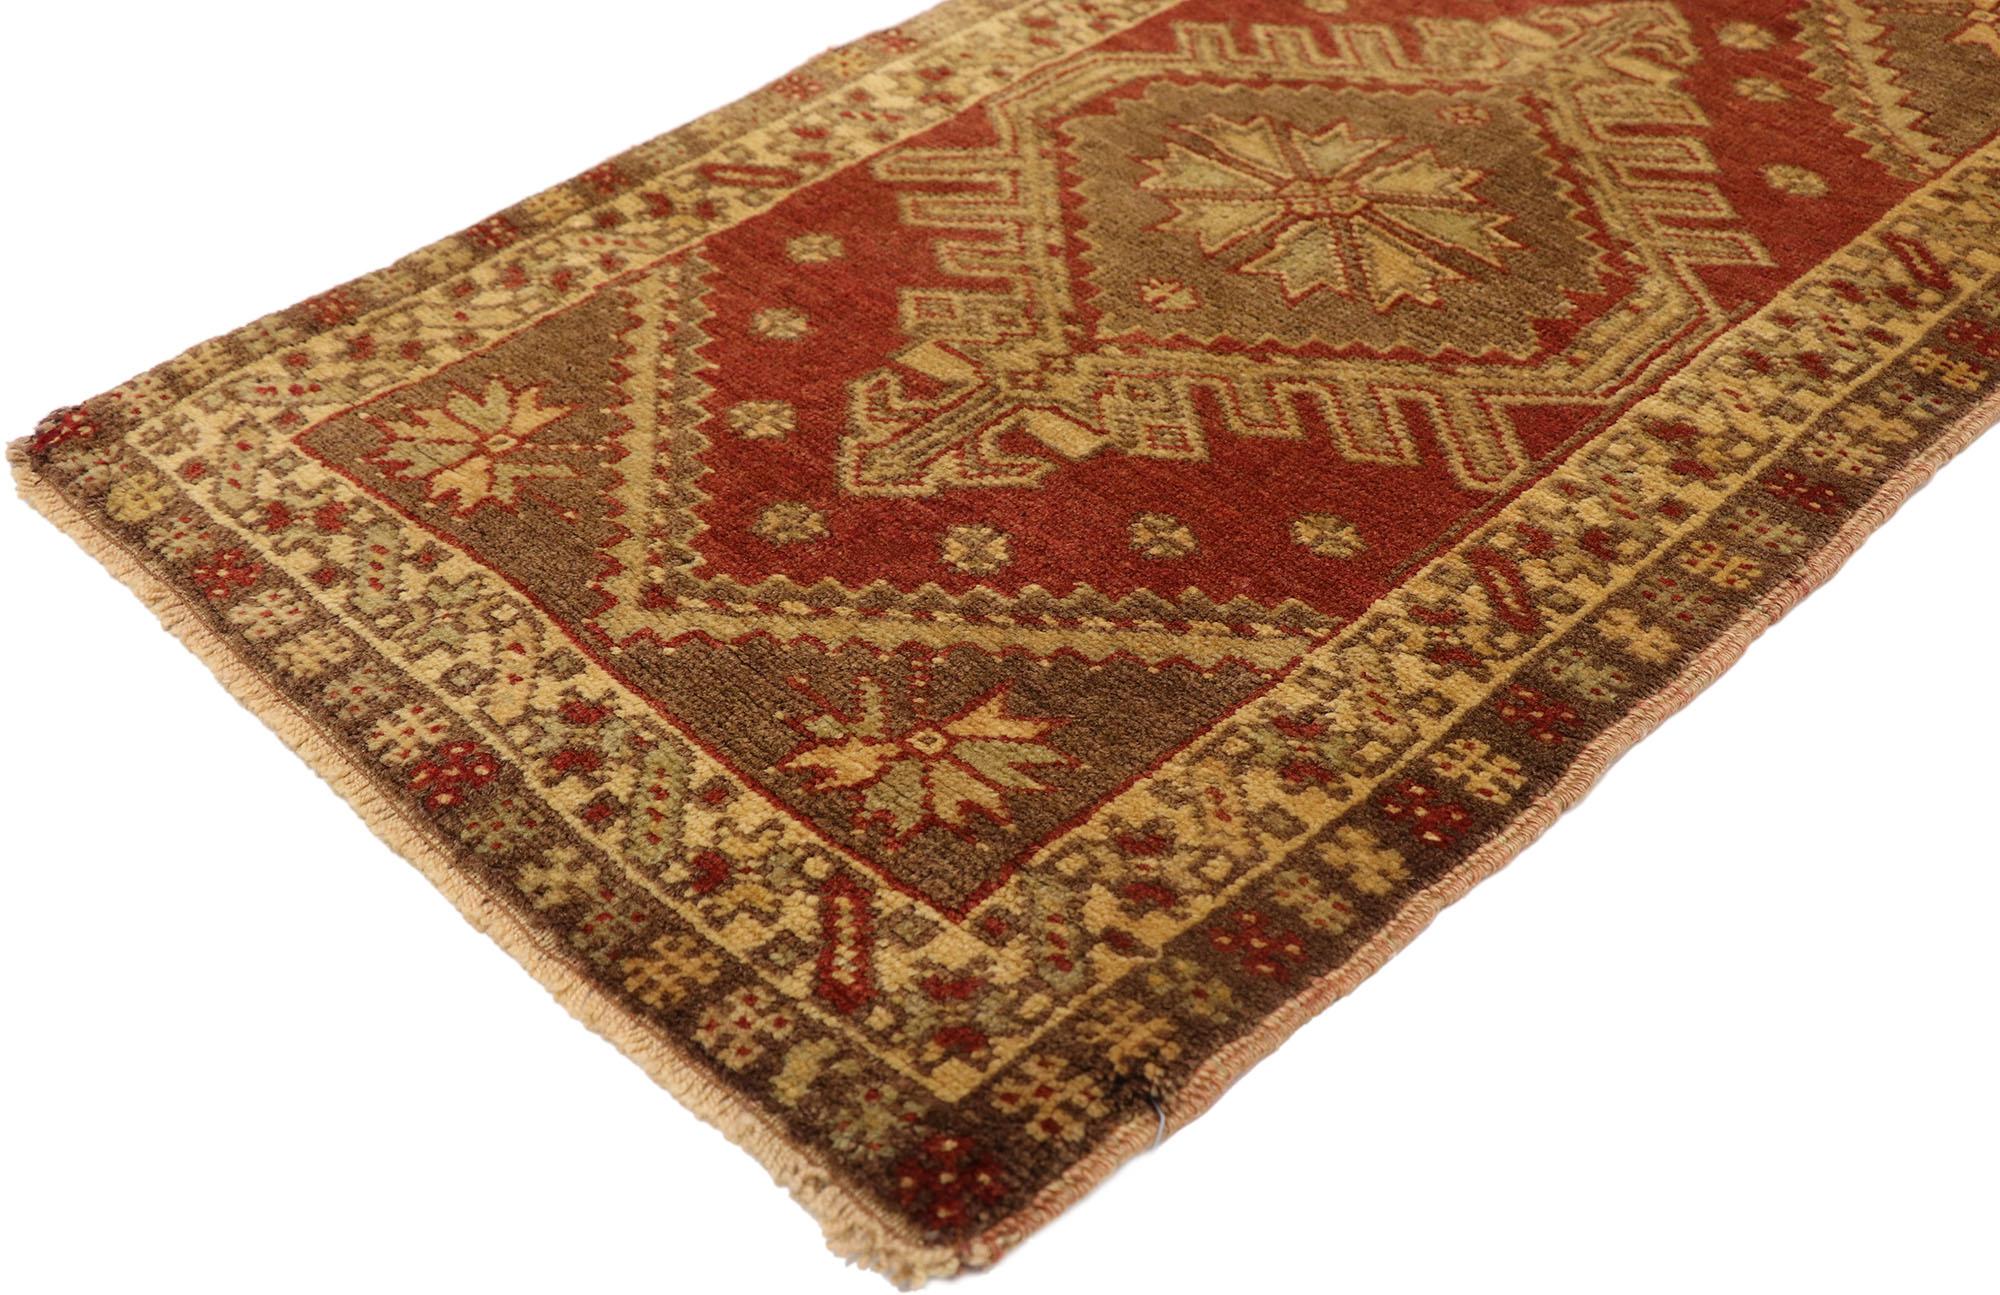 50797 Vintage Turkish Yastik Rug, 01'06  X 02'11.
Vintage Turkish Yastik rugs are the creme de la creme of small Anatolian rugs. Originally used as pillow covers, these beauties have a history as rich as their intricate designs. Yastik rug patterns